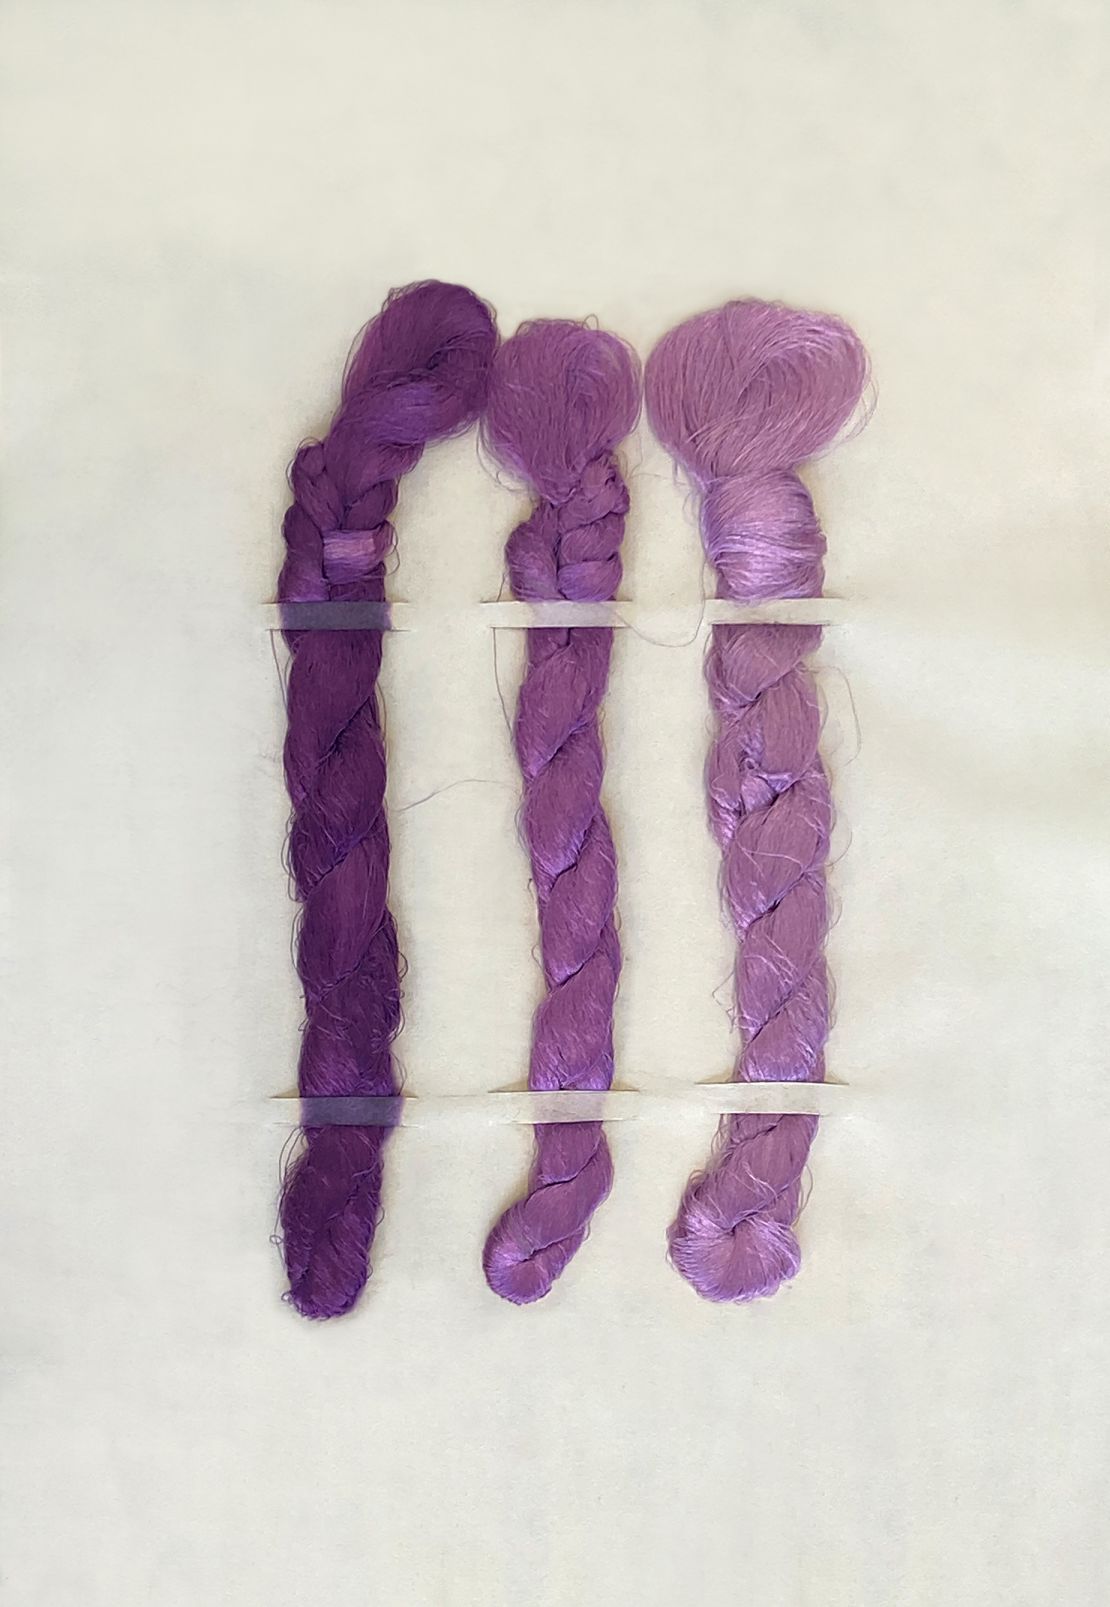 The results of dyeing experiments with Mauvein on silk by F. E. Meyer, 1925.